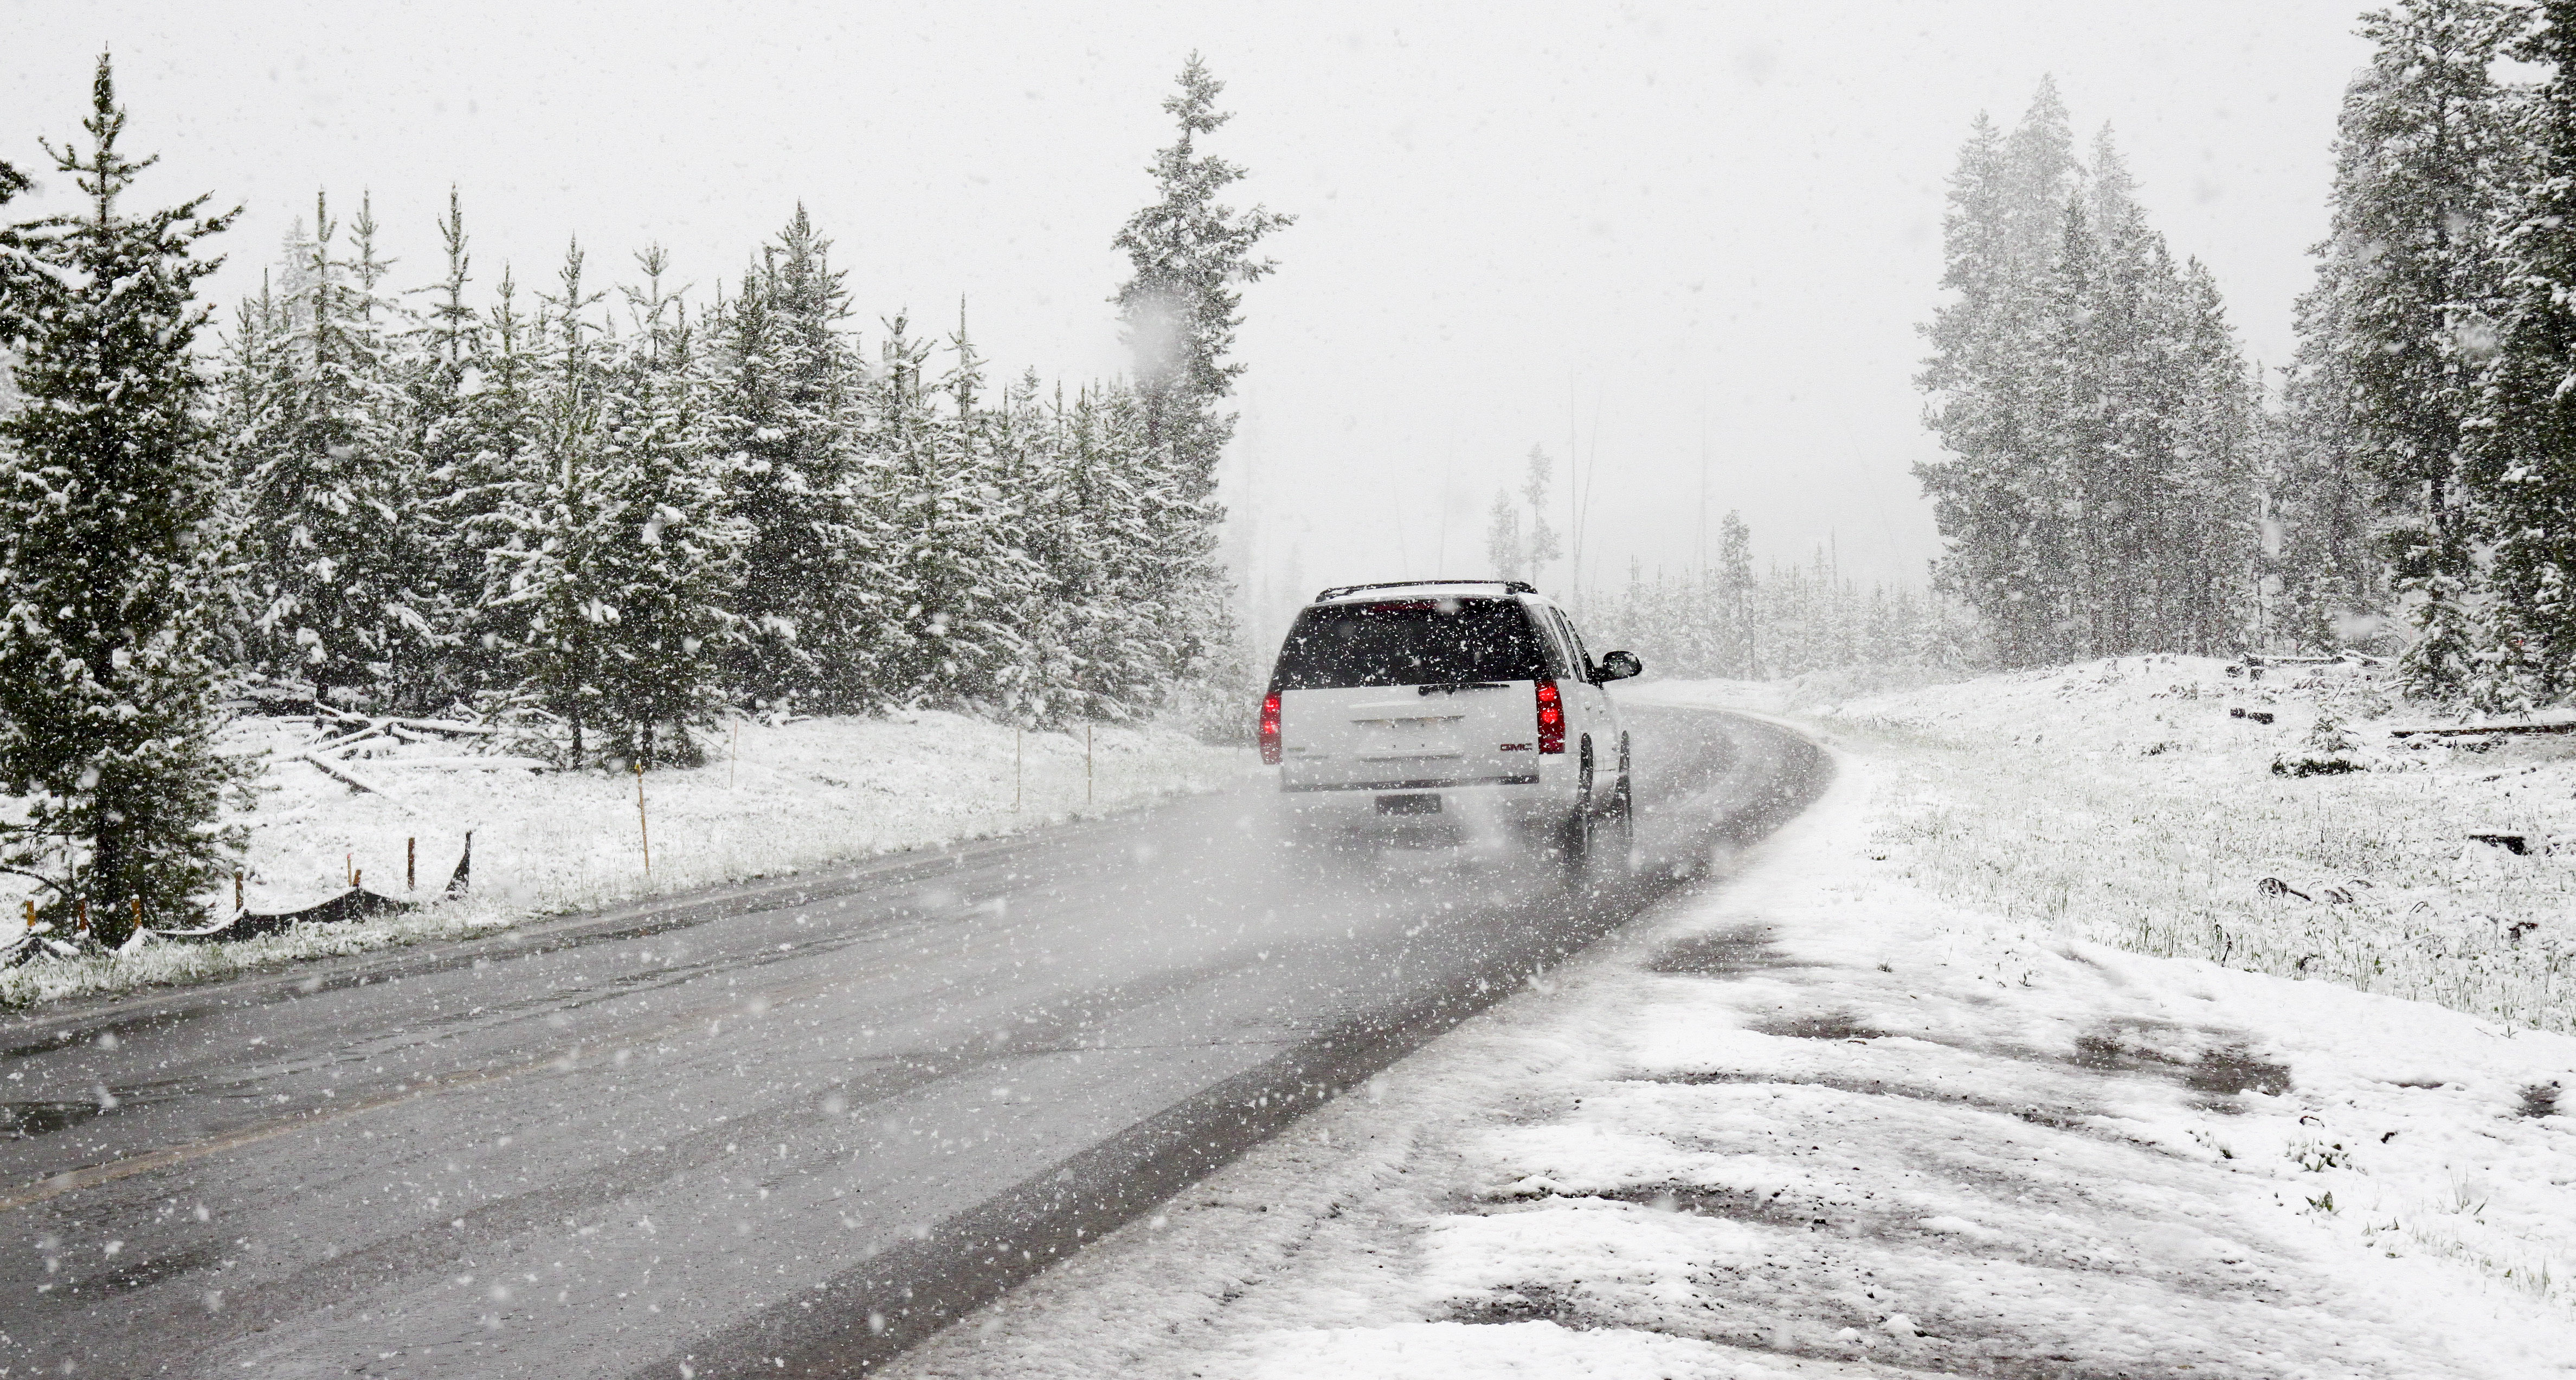 Take Care on Highways as a Winter Storm Approaches